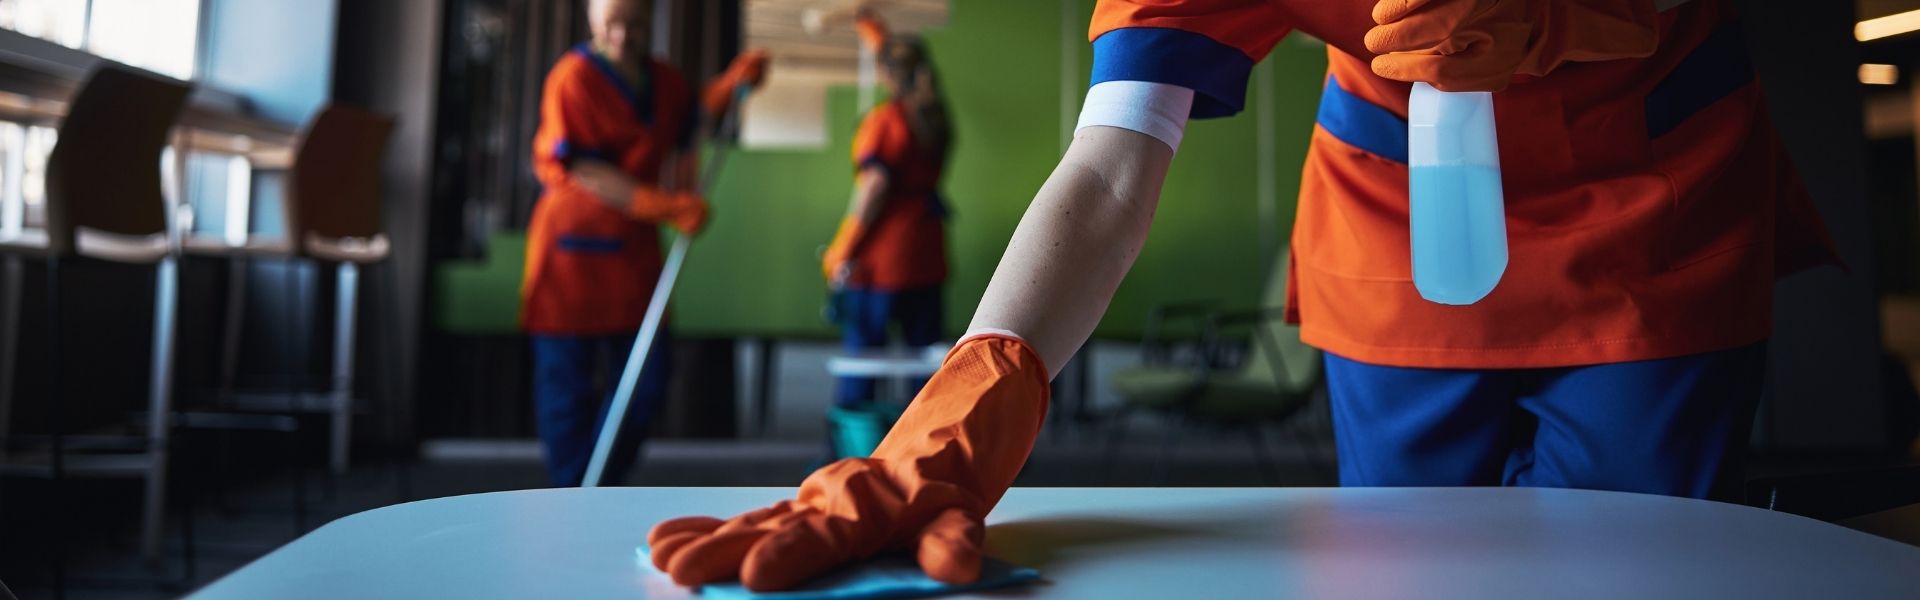 What To Consider When Choosing a Commercial Janitorial Company?